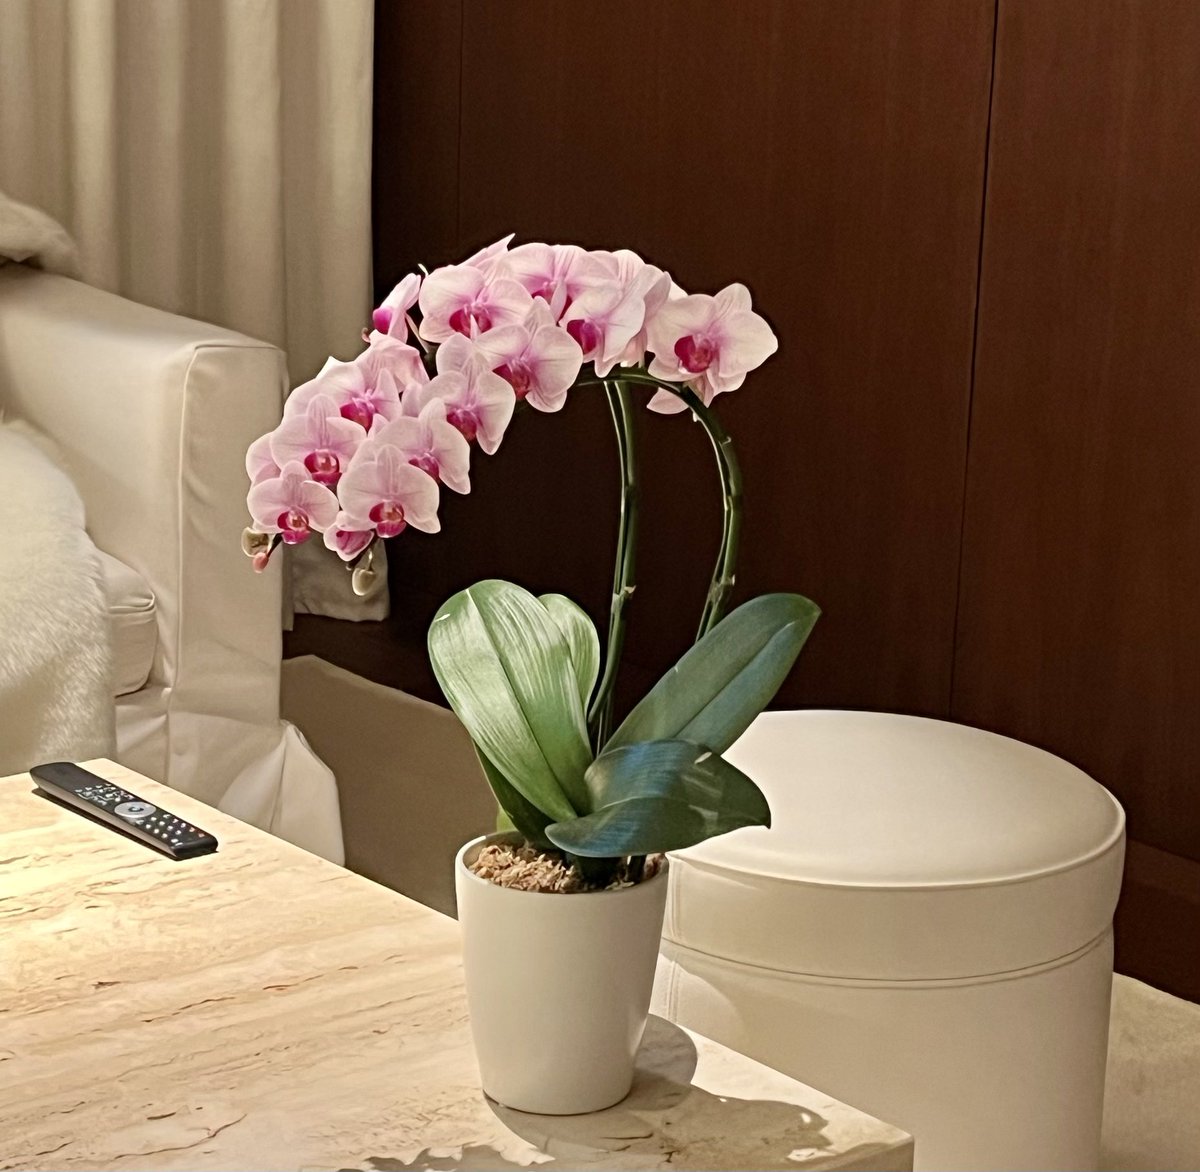 There’s something so comforting and luxurious about this suite, simply furnished in white leather and warm-toned woods with pretty pink orchids @EDITIONHotels #ginza 🩷🤍🤎#tokyo #hoteldesign #tokyoeditionginza #forbestravelguide #travelinstyle #remarkabletravels #pinkandwhite